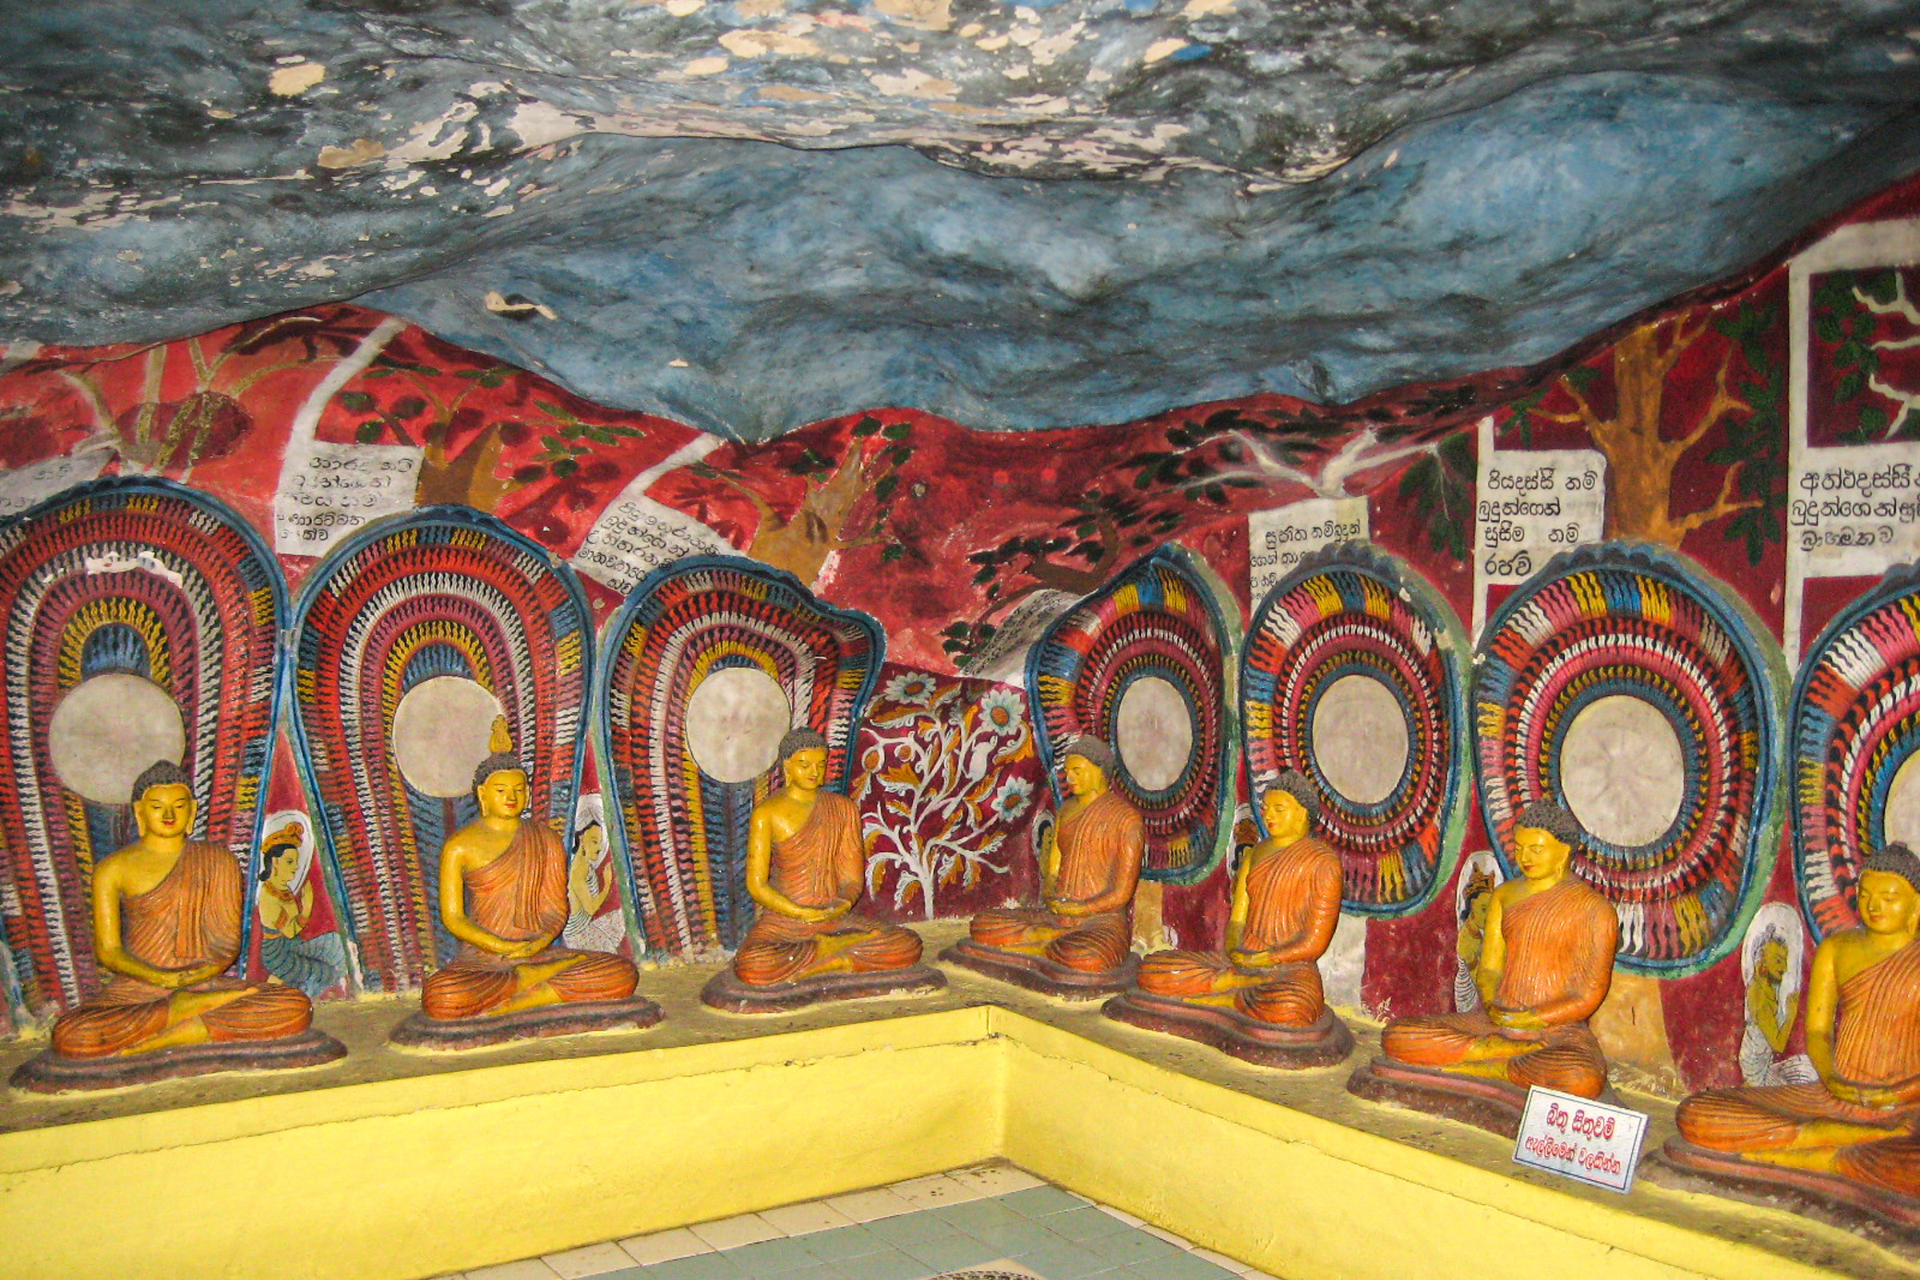 Buddha statues and paintings inside the Dhowa Rock Temple.